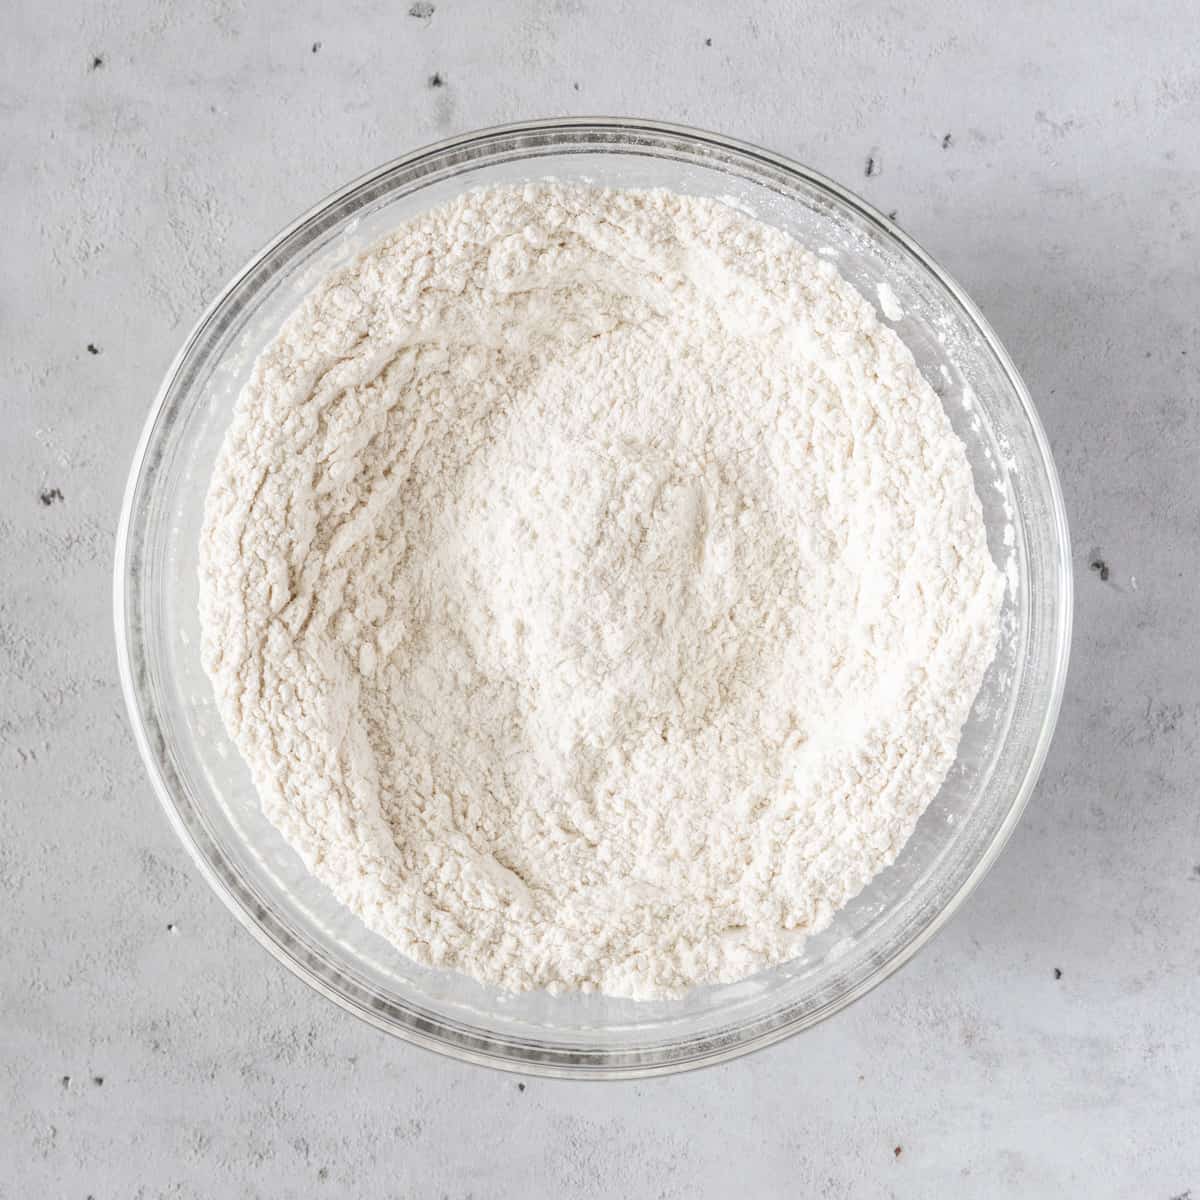 the flour and salt combined in a glass bowl on a grey background.